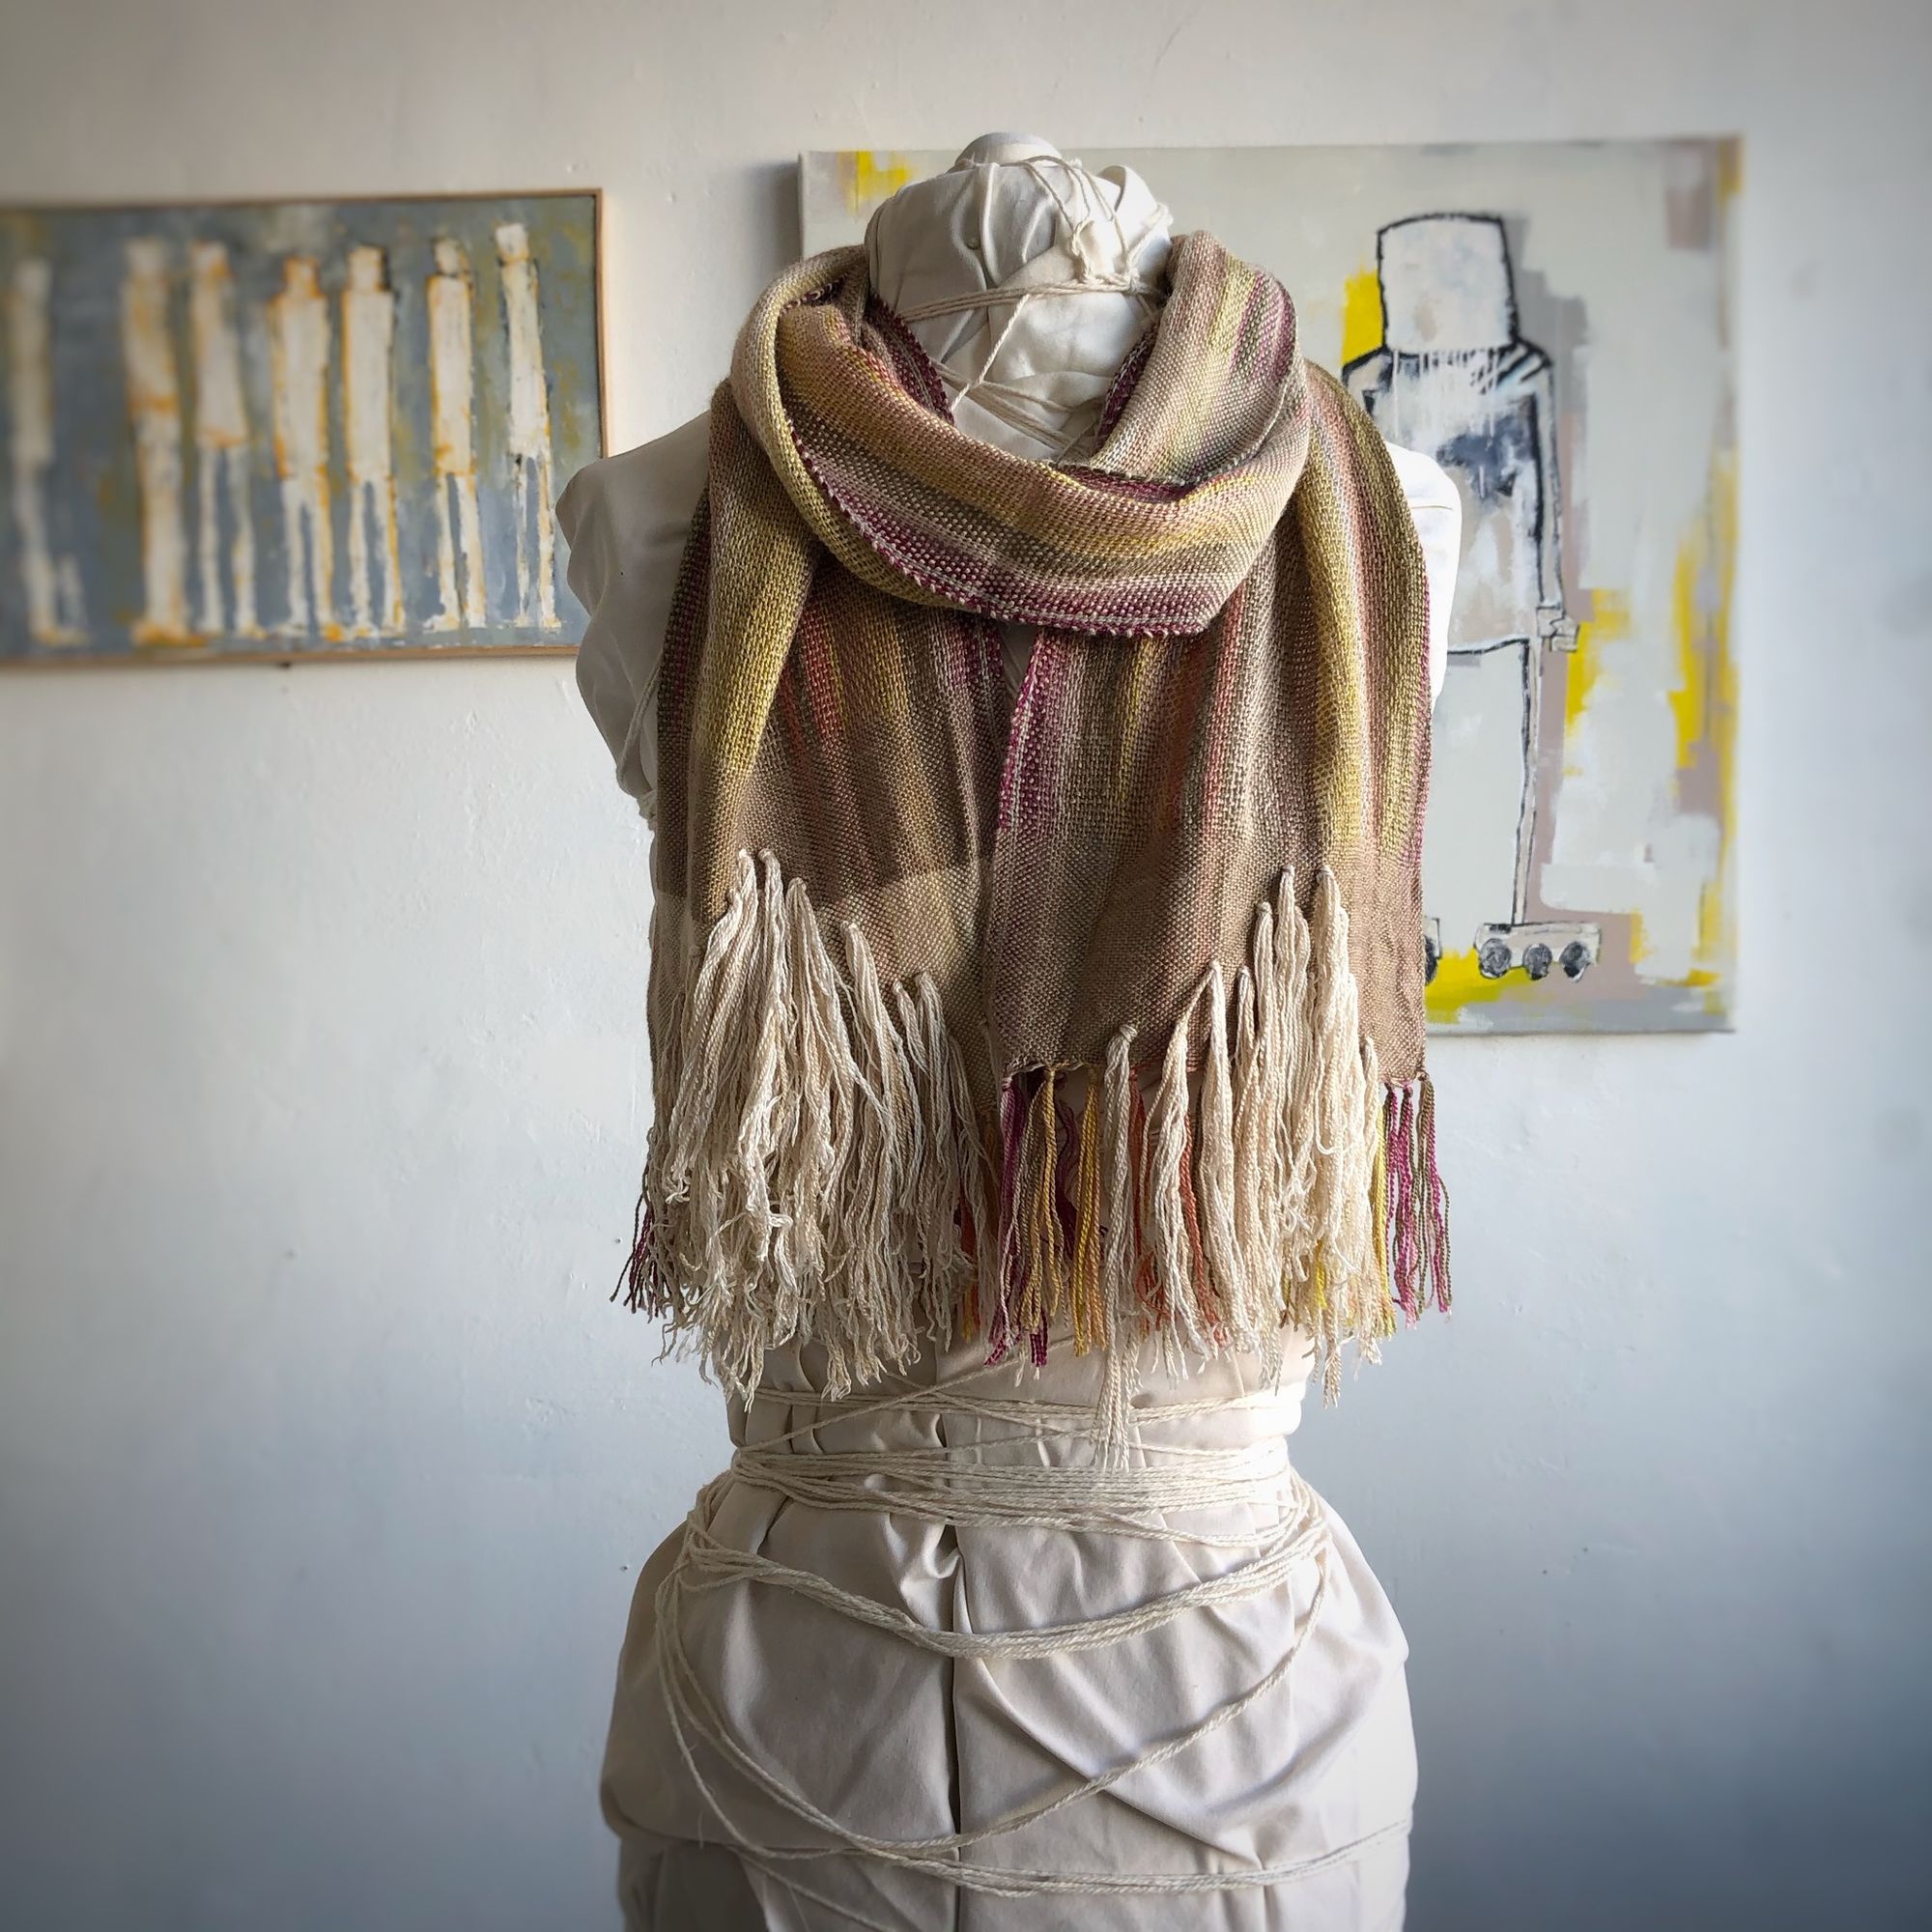 naturally colored scarf on a white mannequin in a gallery with paintings in the background